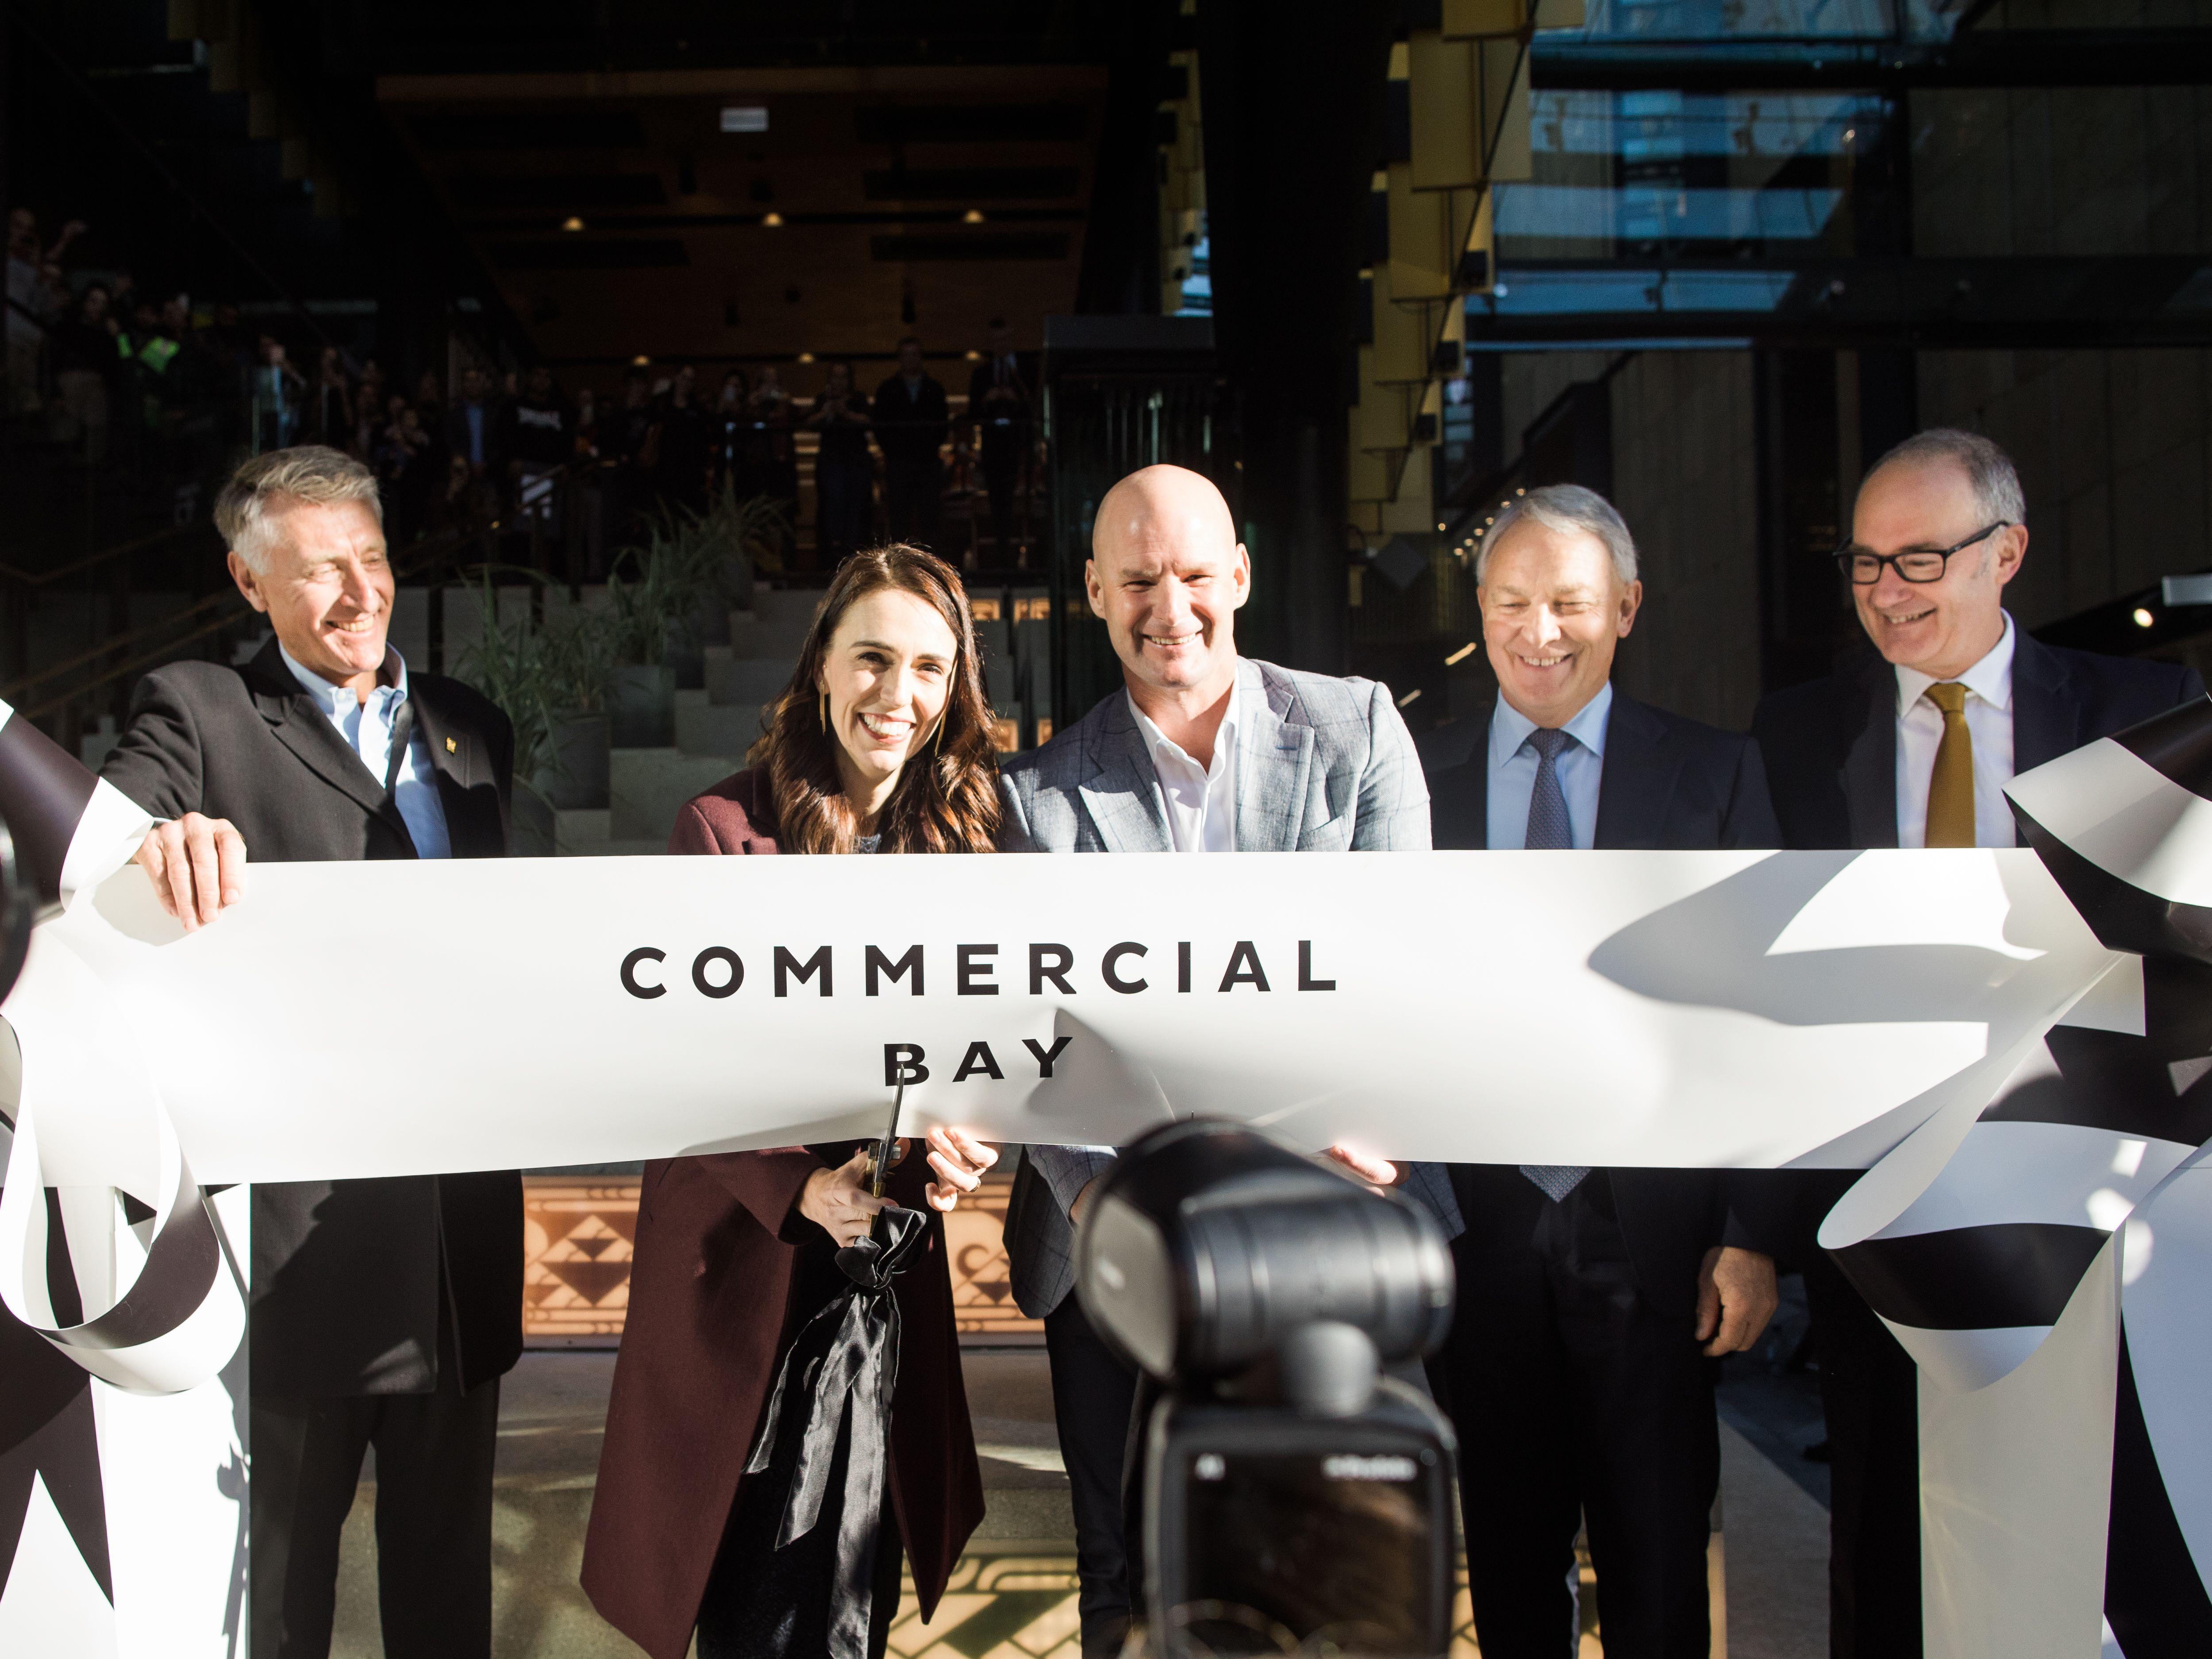 The Commercial Bay opening in photos